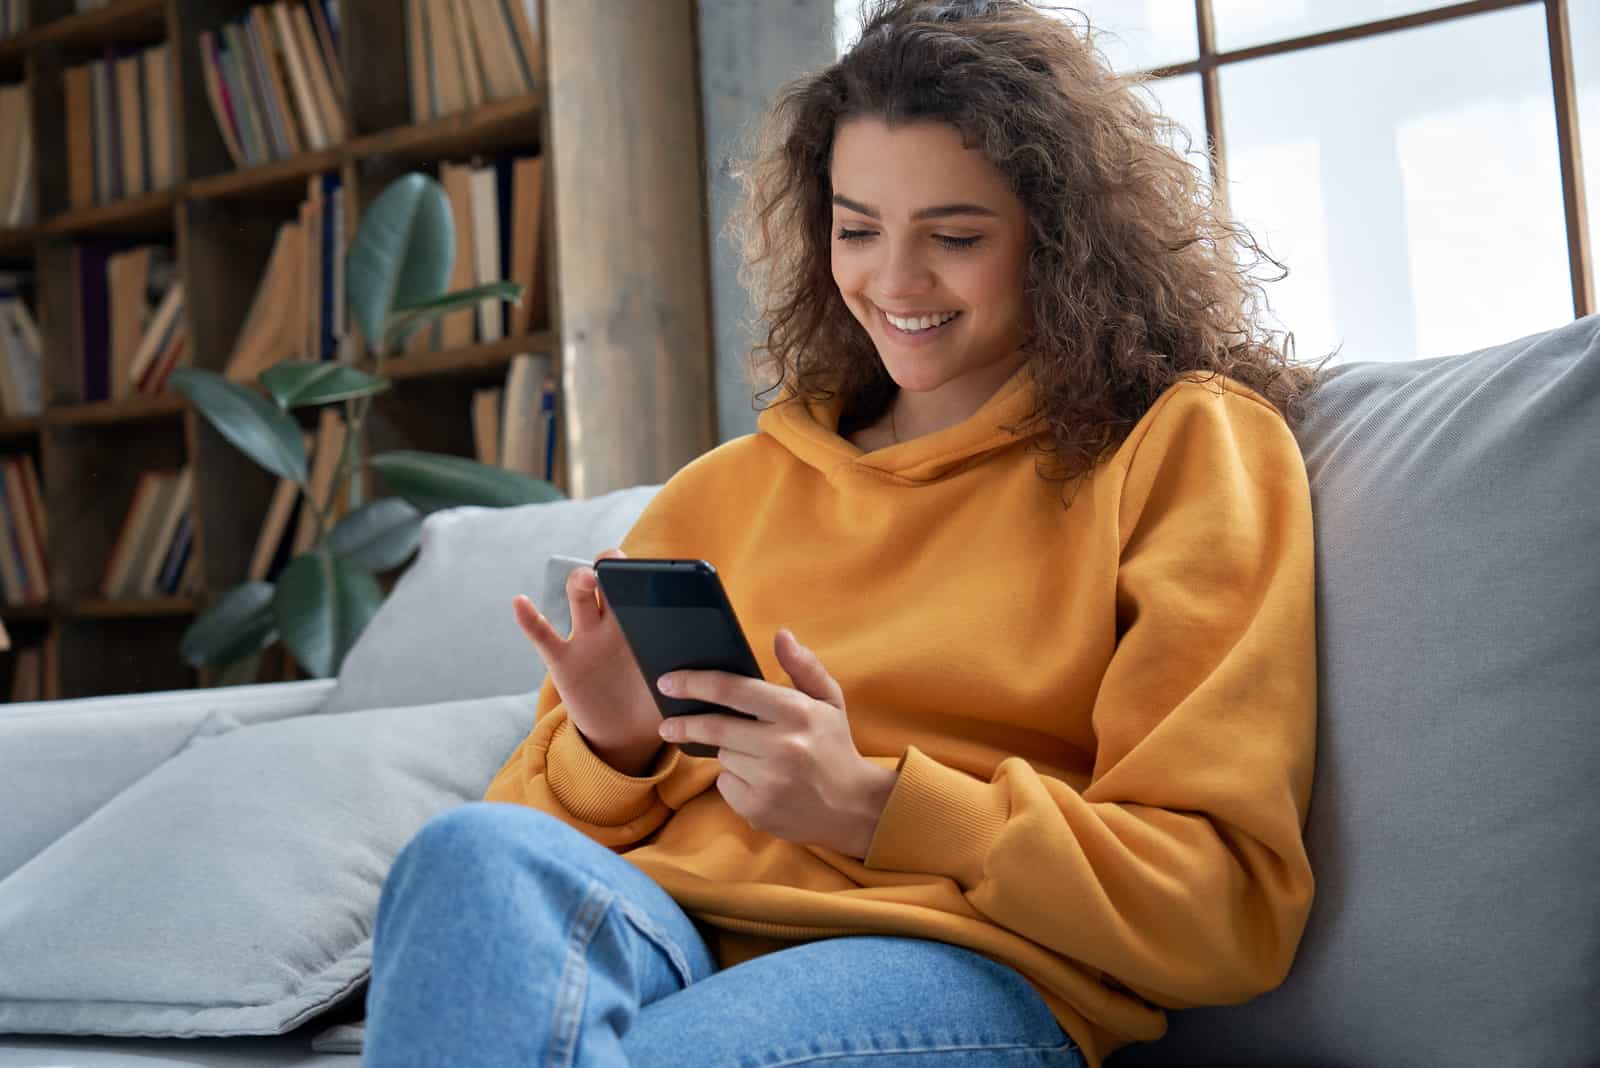 a smiling woman sits on the couch and keys on the phone